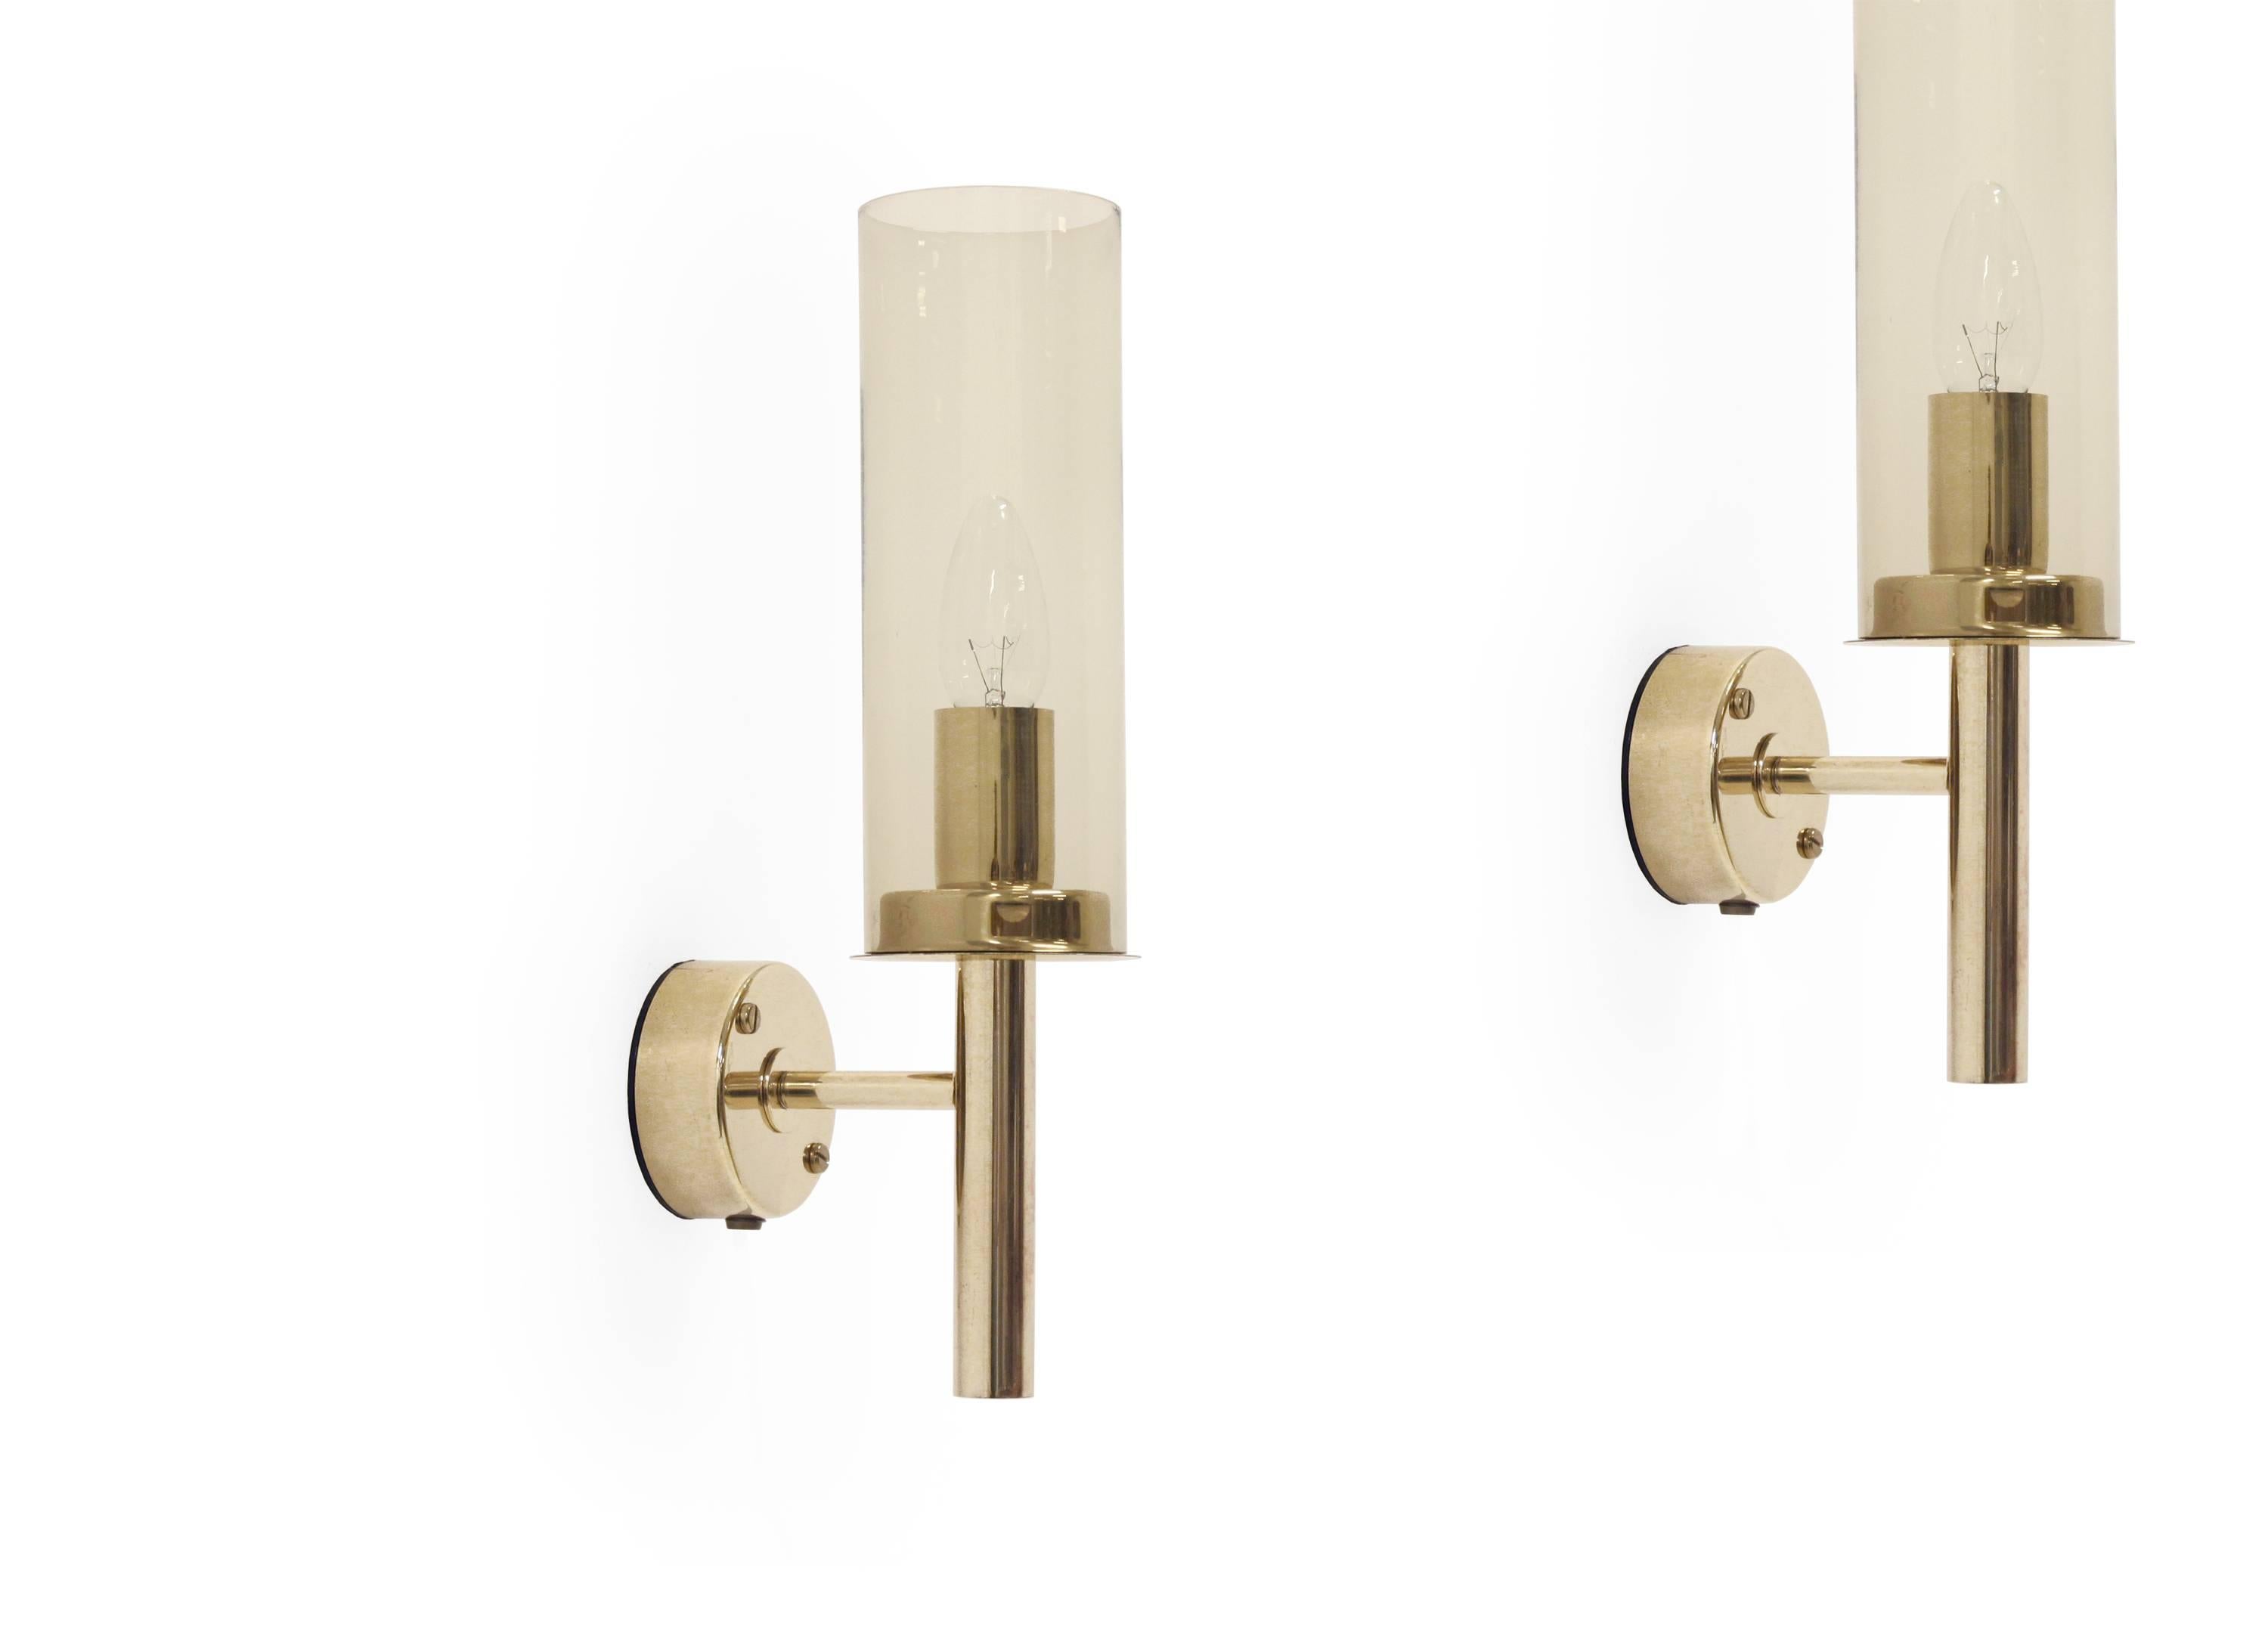 Swedish Wonderful Pair of Wall Lights in Brass by Hans-Agne Jakobsson, 1960s